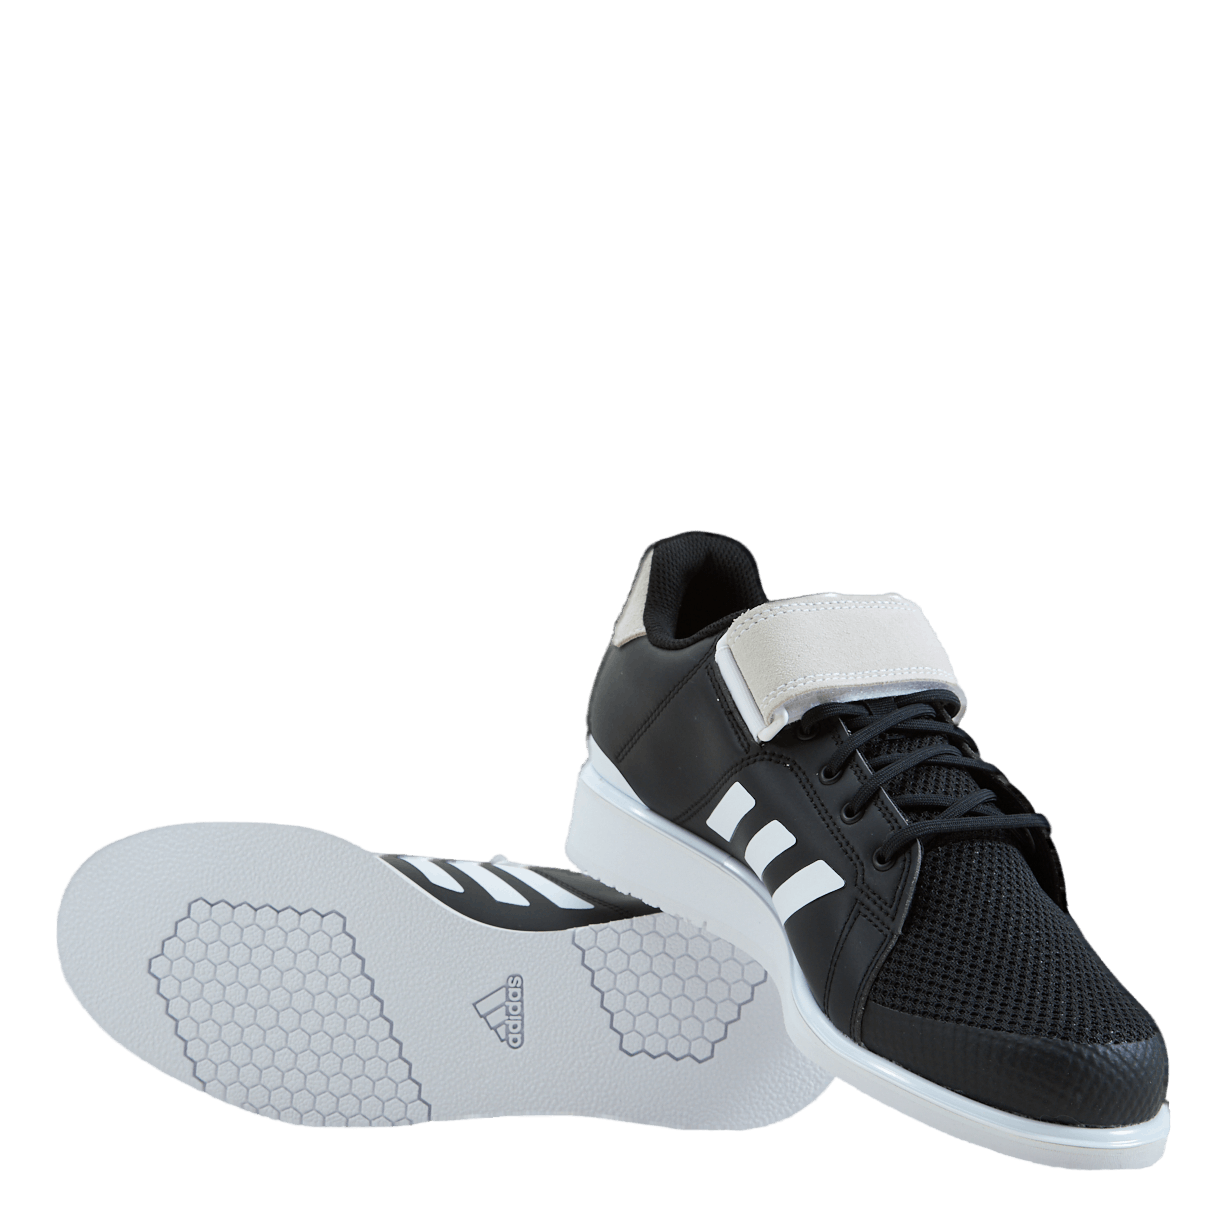 Power Perfect 3 Tokyo Weightlifting Shoes Core Black / Core Black / Cloud White